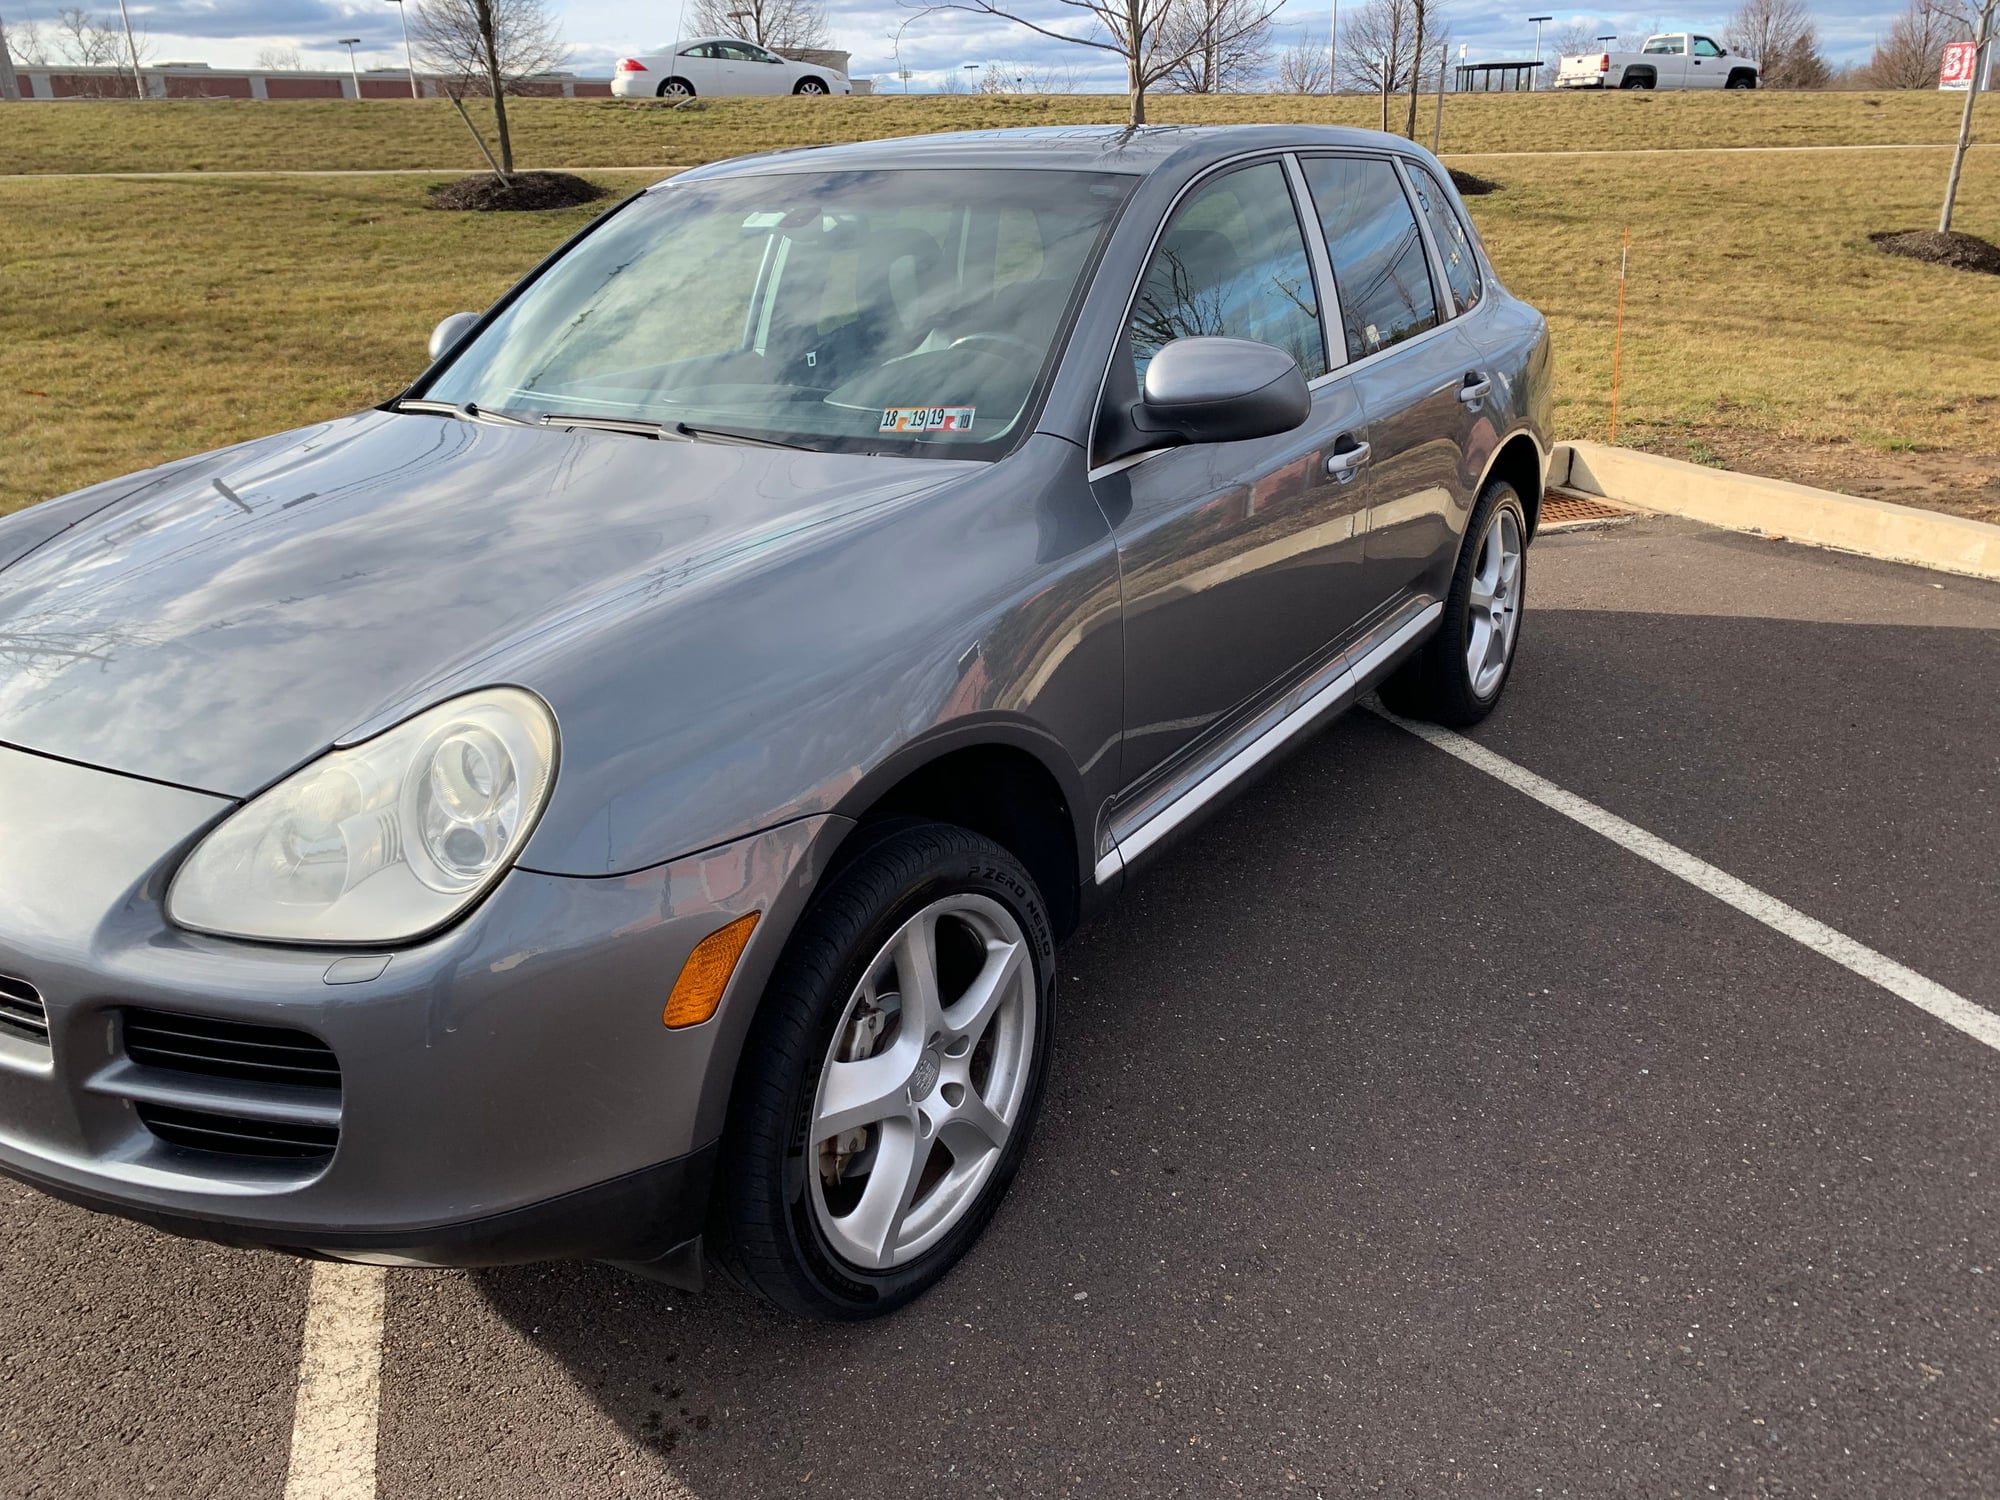 2004 Porsche Cayenne - 2004 Porsche Cayenne S - 134K - Tons of Records - Tow Package - Used - VIN WP1AB29P84LA77163 - 134,000 Miles - 8 cyl - AWD - Automatic - SUV - Gray - Jenkintown, PA 19046, United States